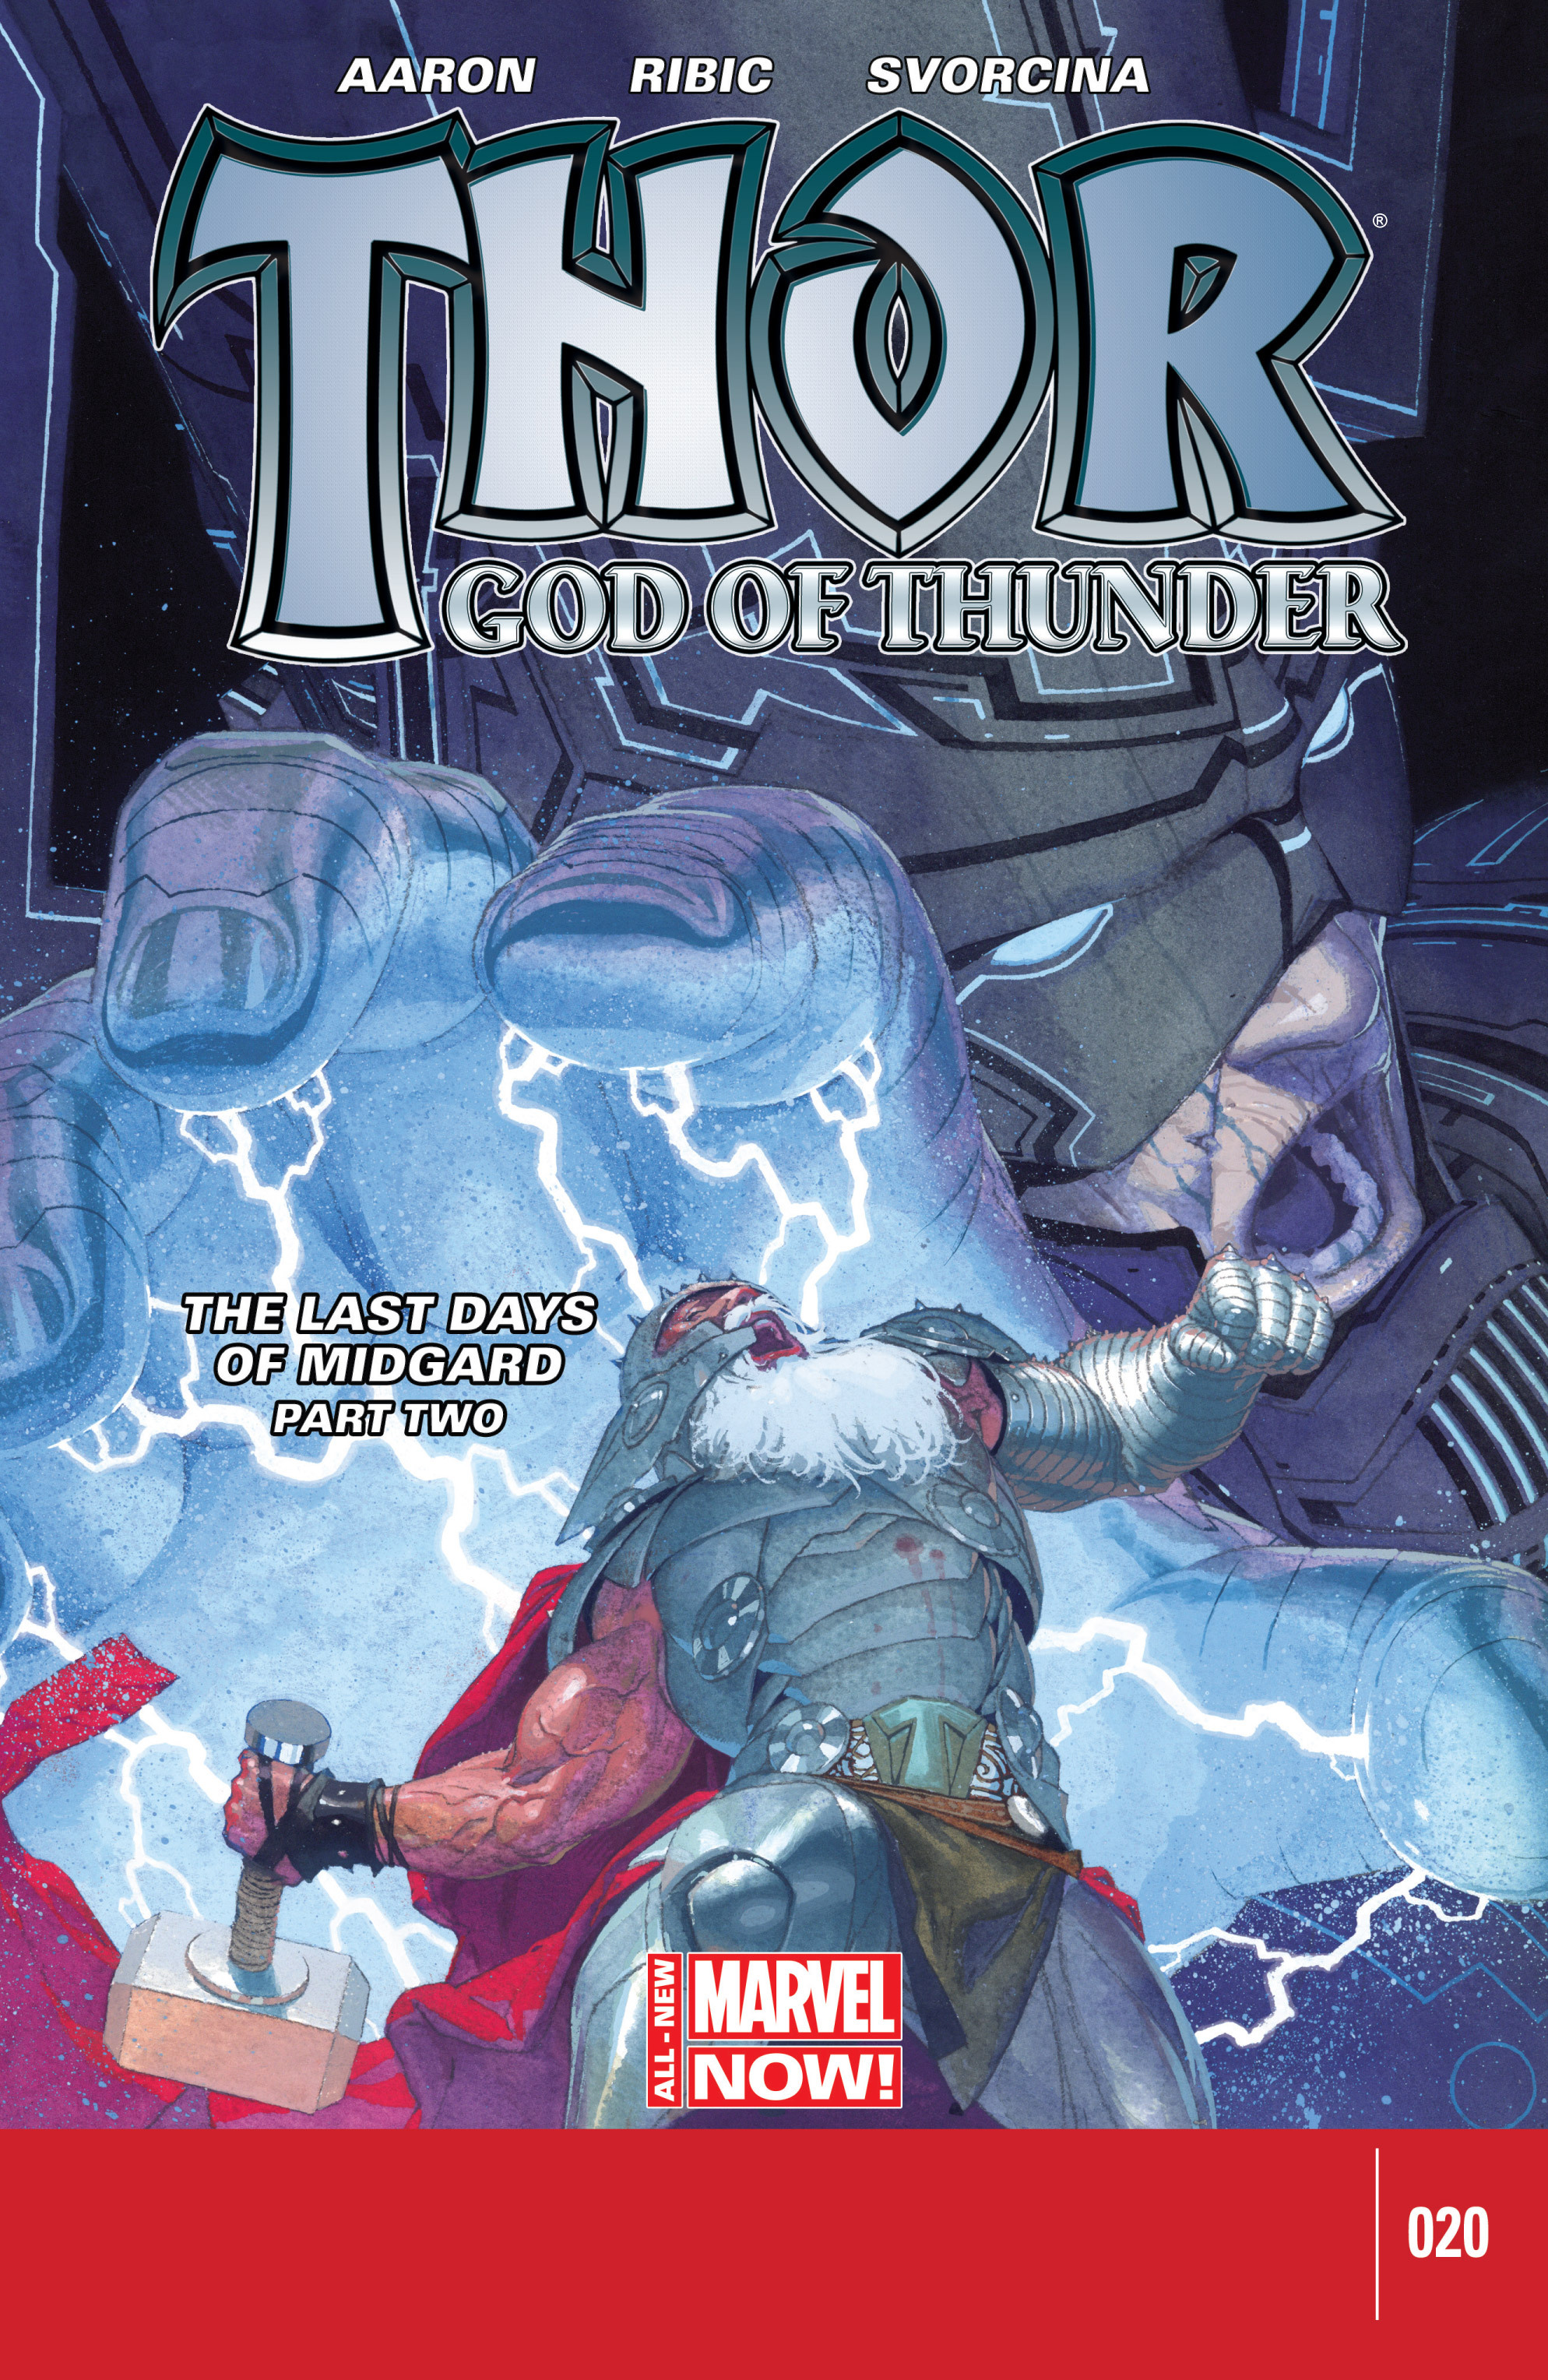 Read online Thor: God of Thunder comic -  Issue #20 - 1